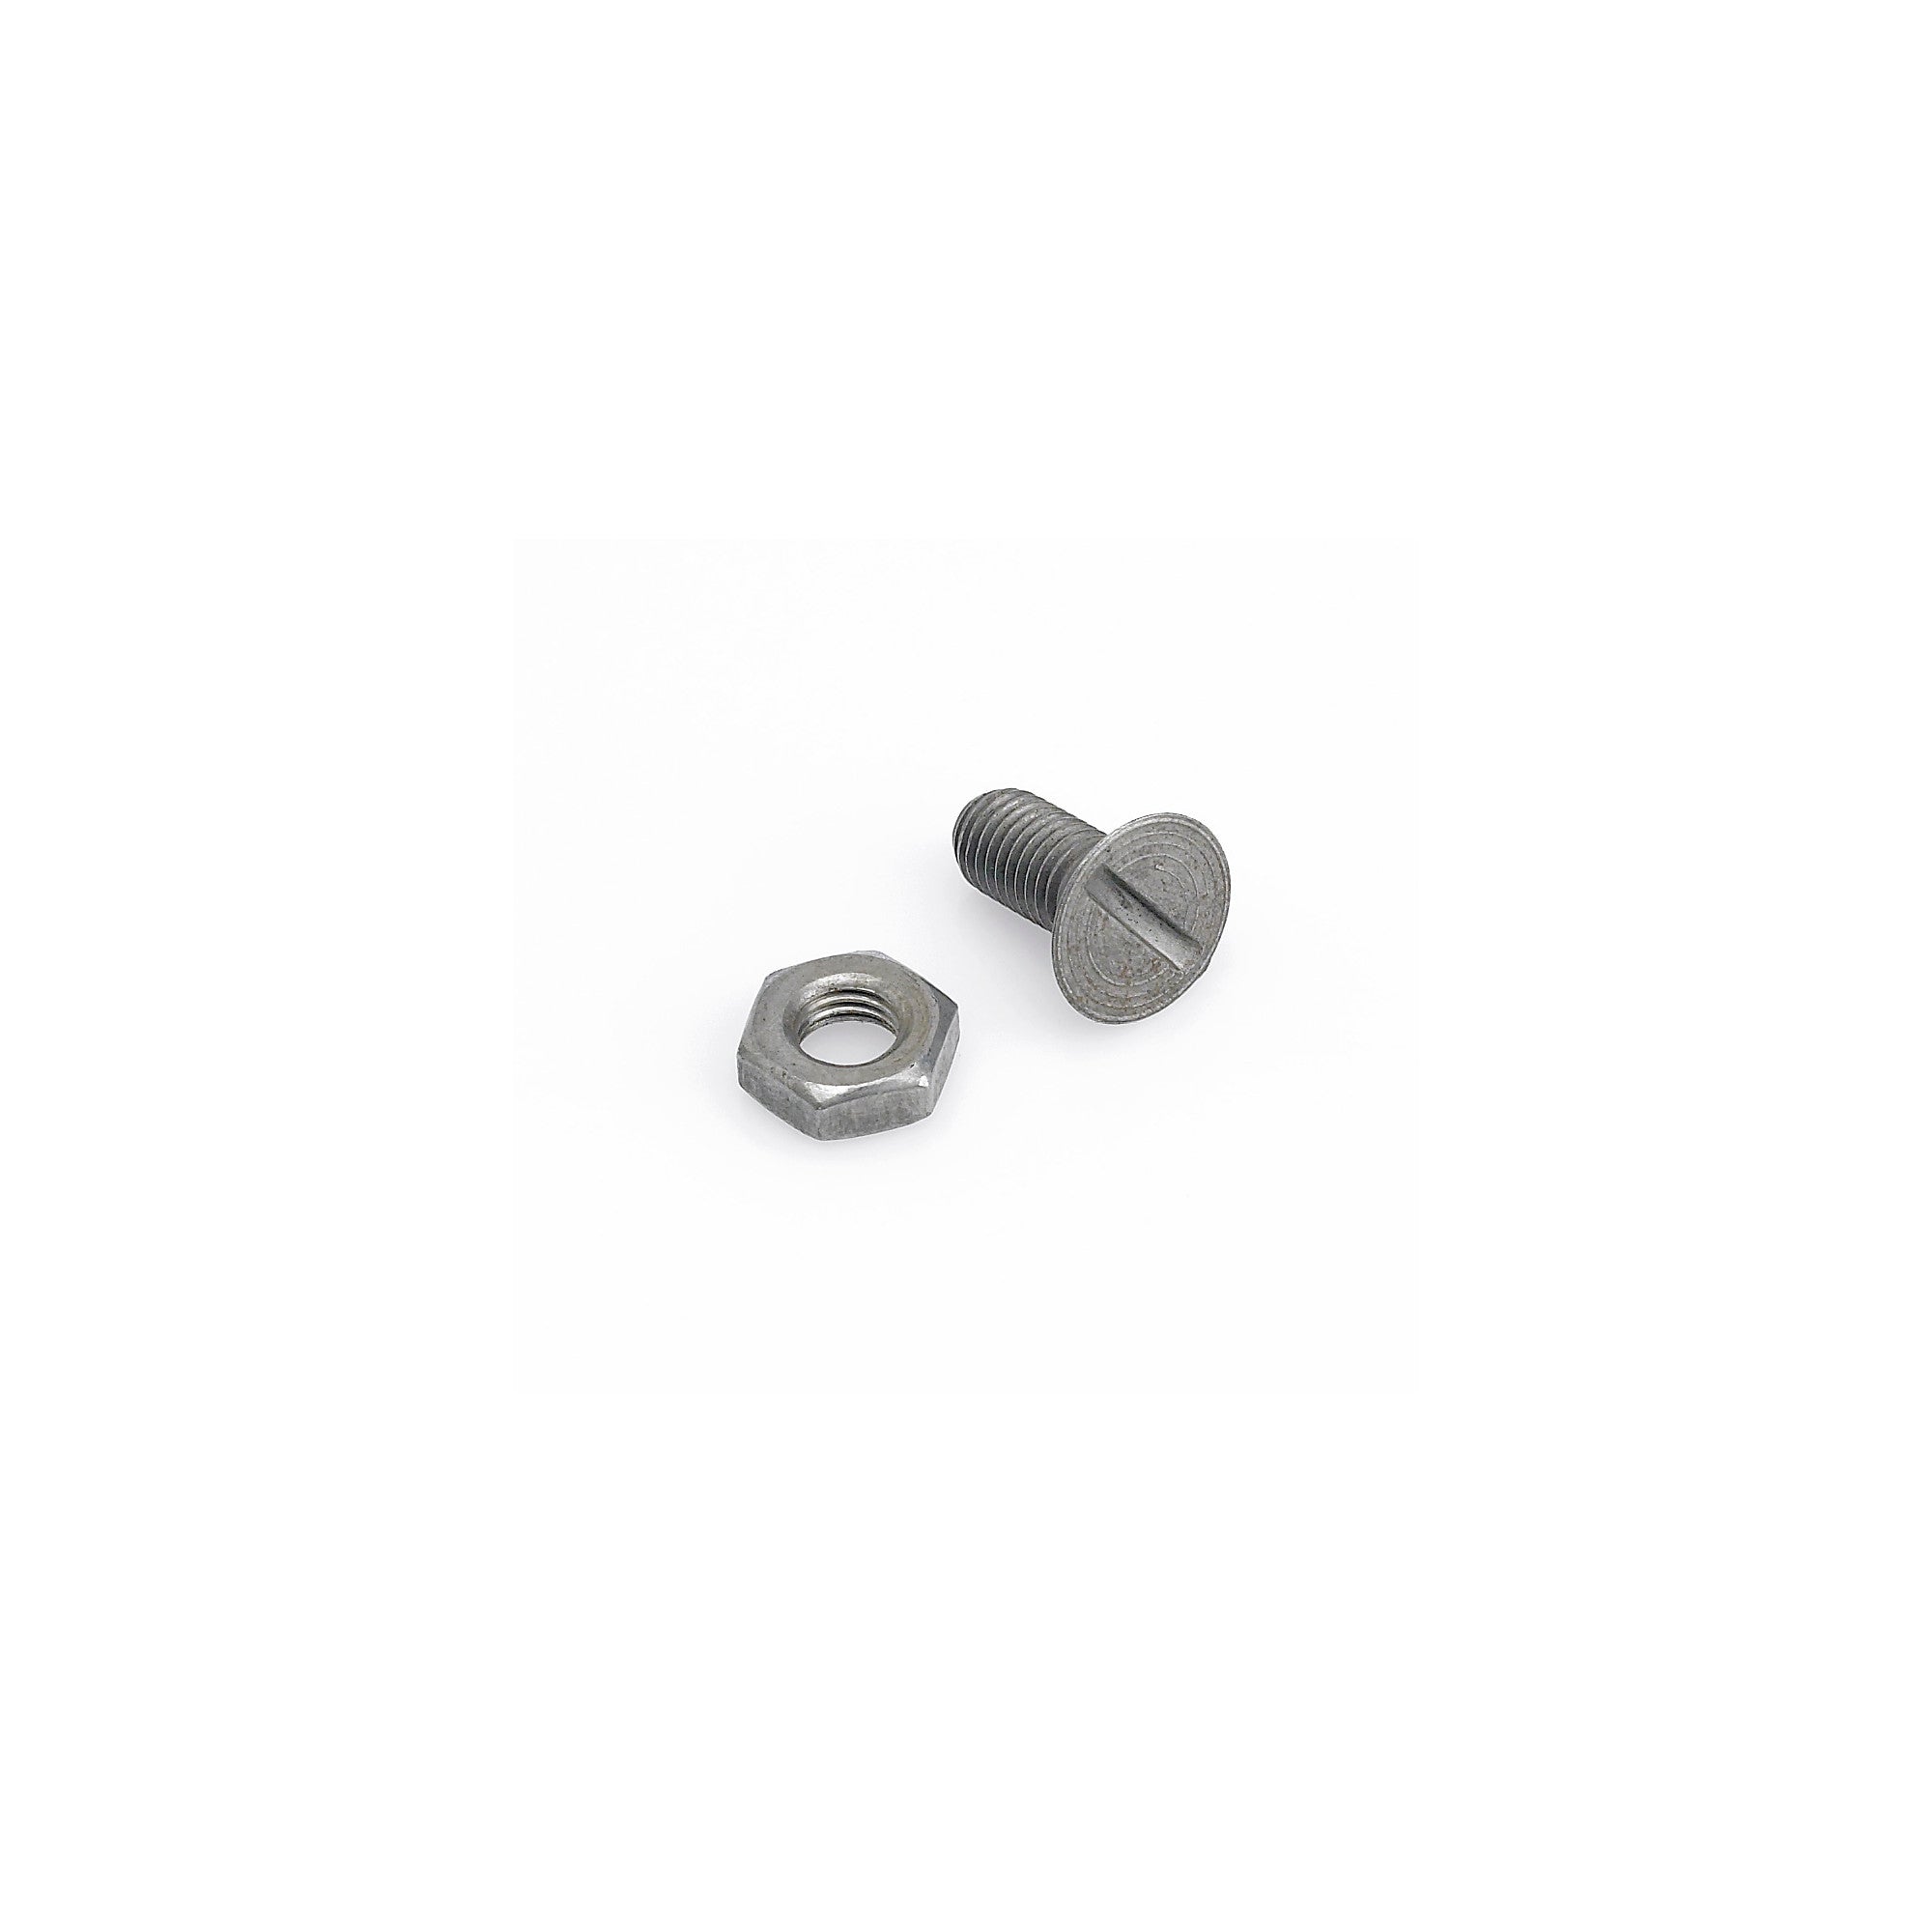 Replacement Pivot Bolt and Nut for Shears